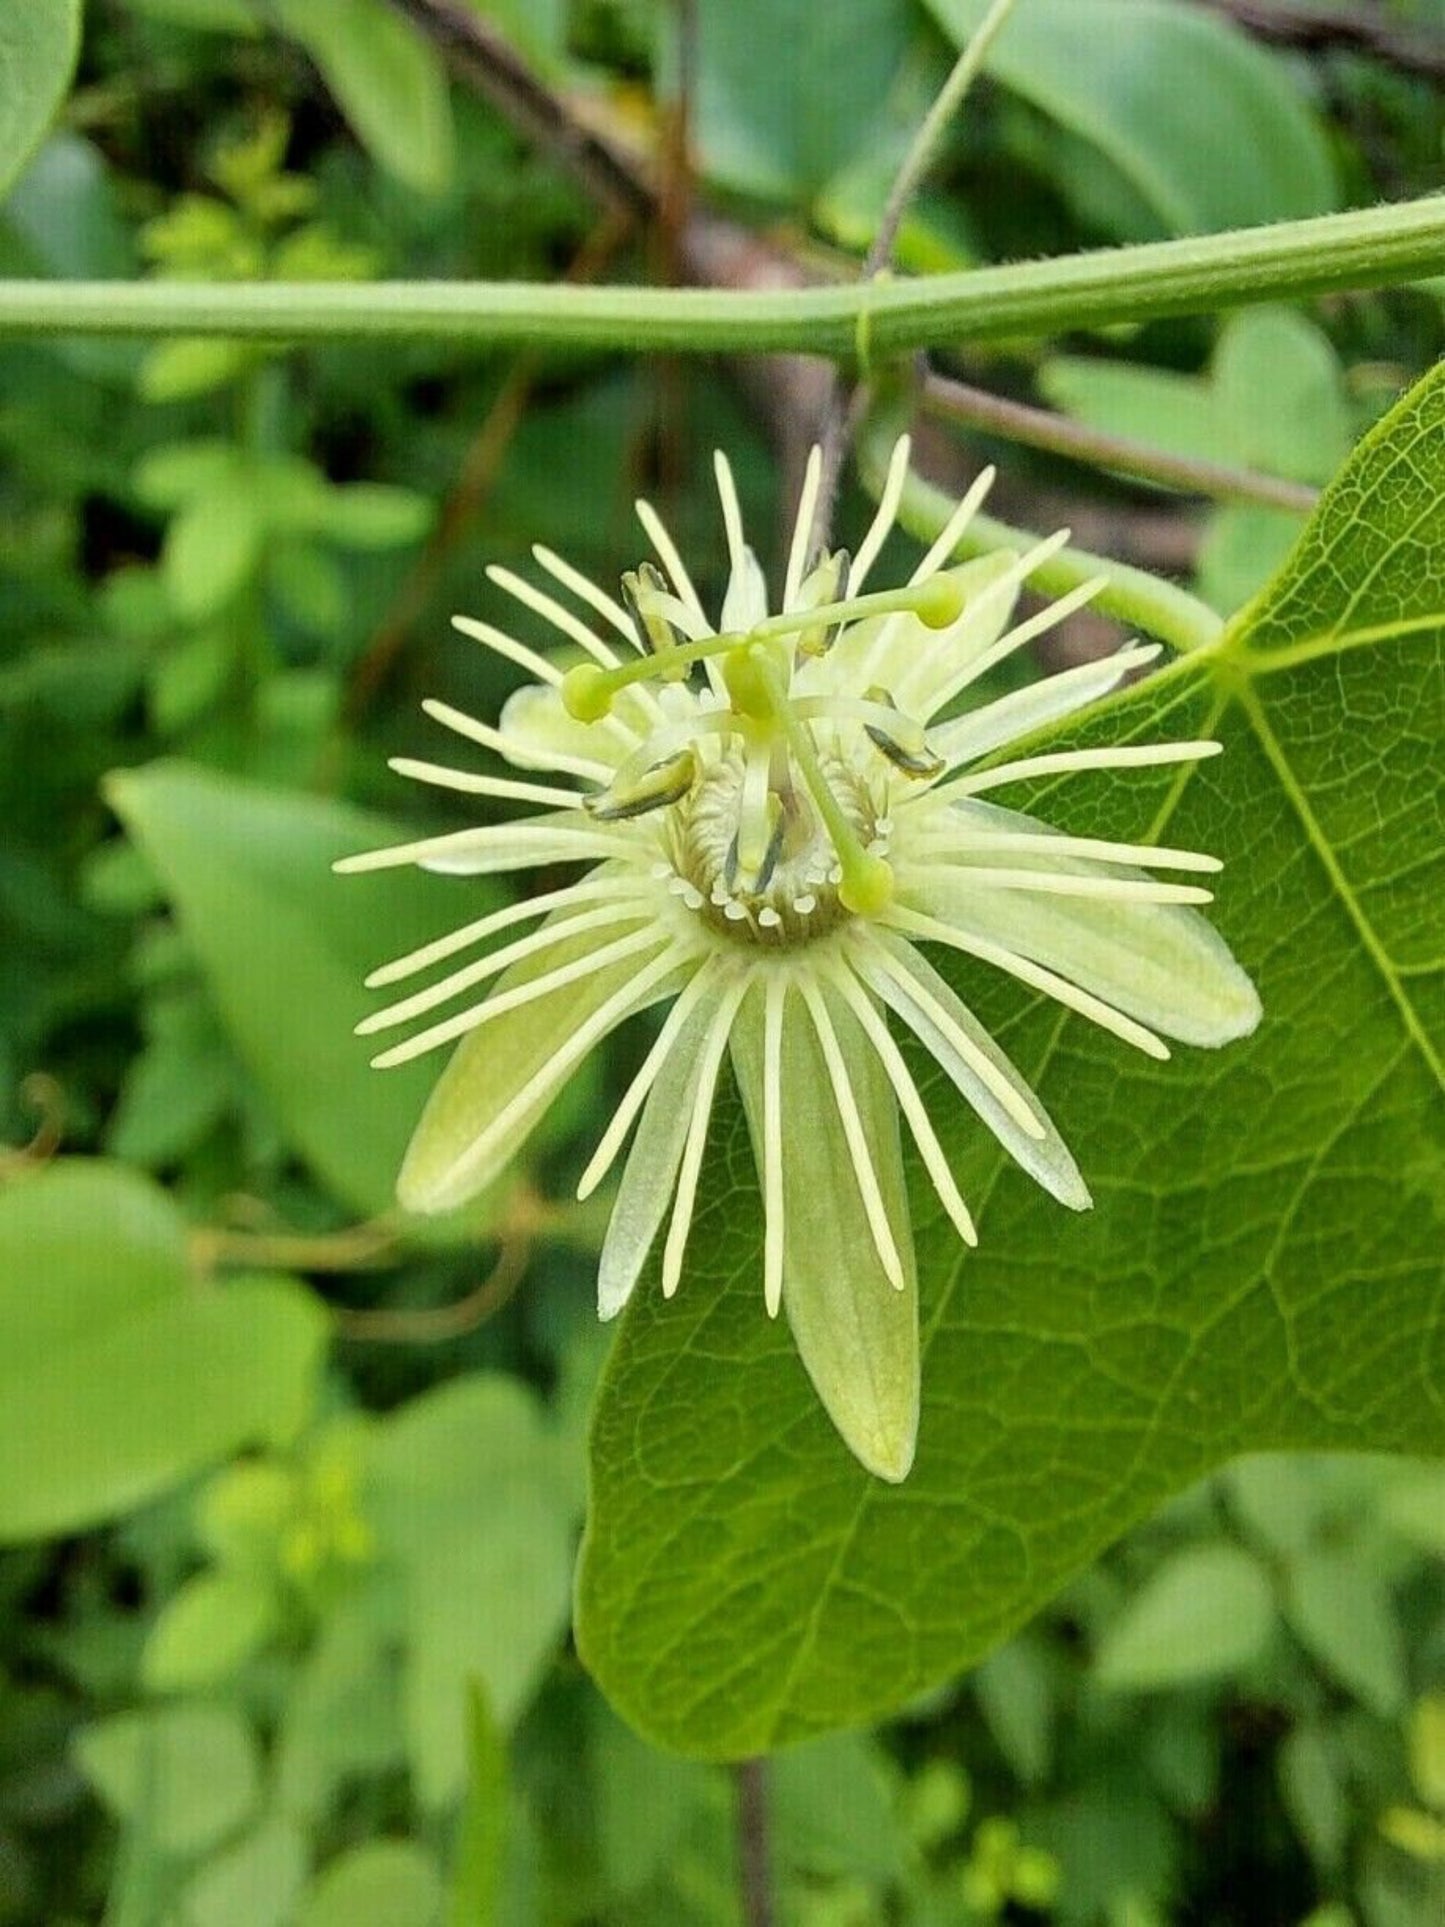 passiflora lutea is the host plant for Gulf Fritillary butterfly